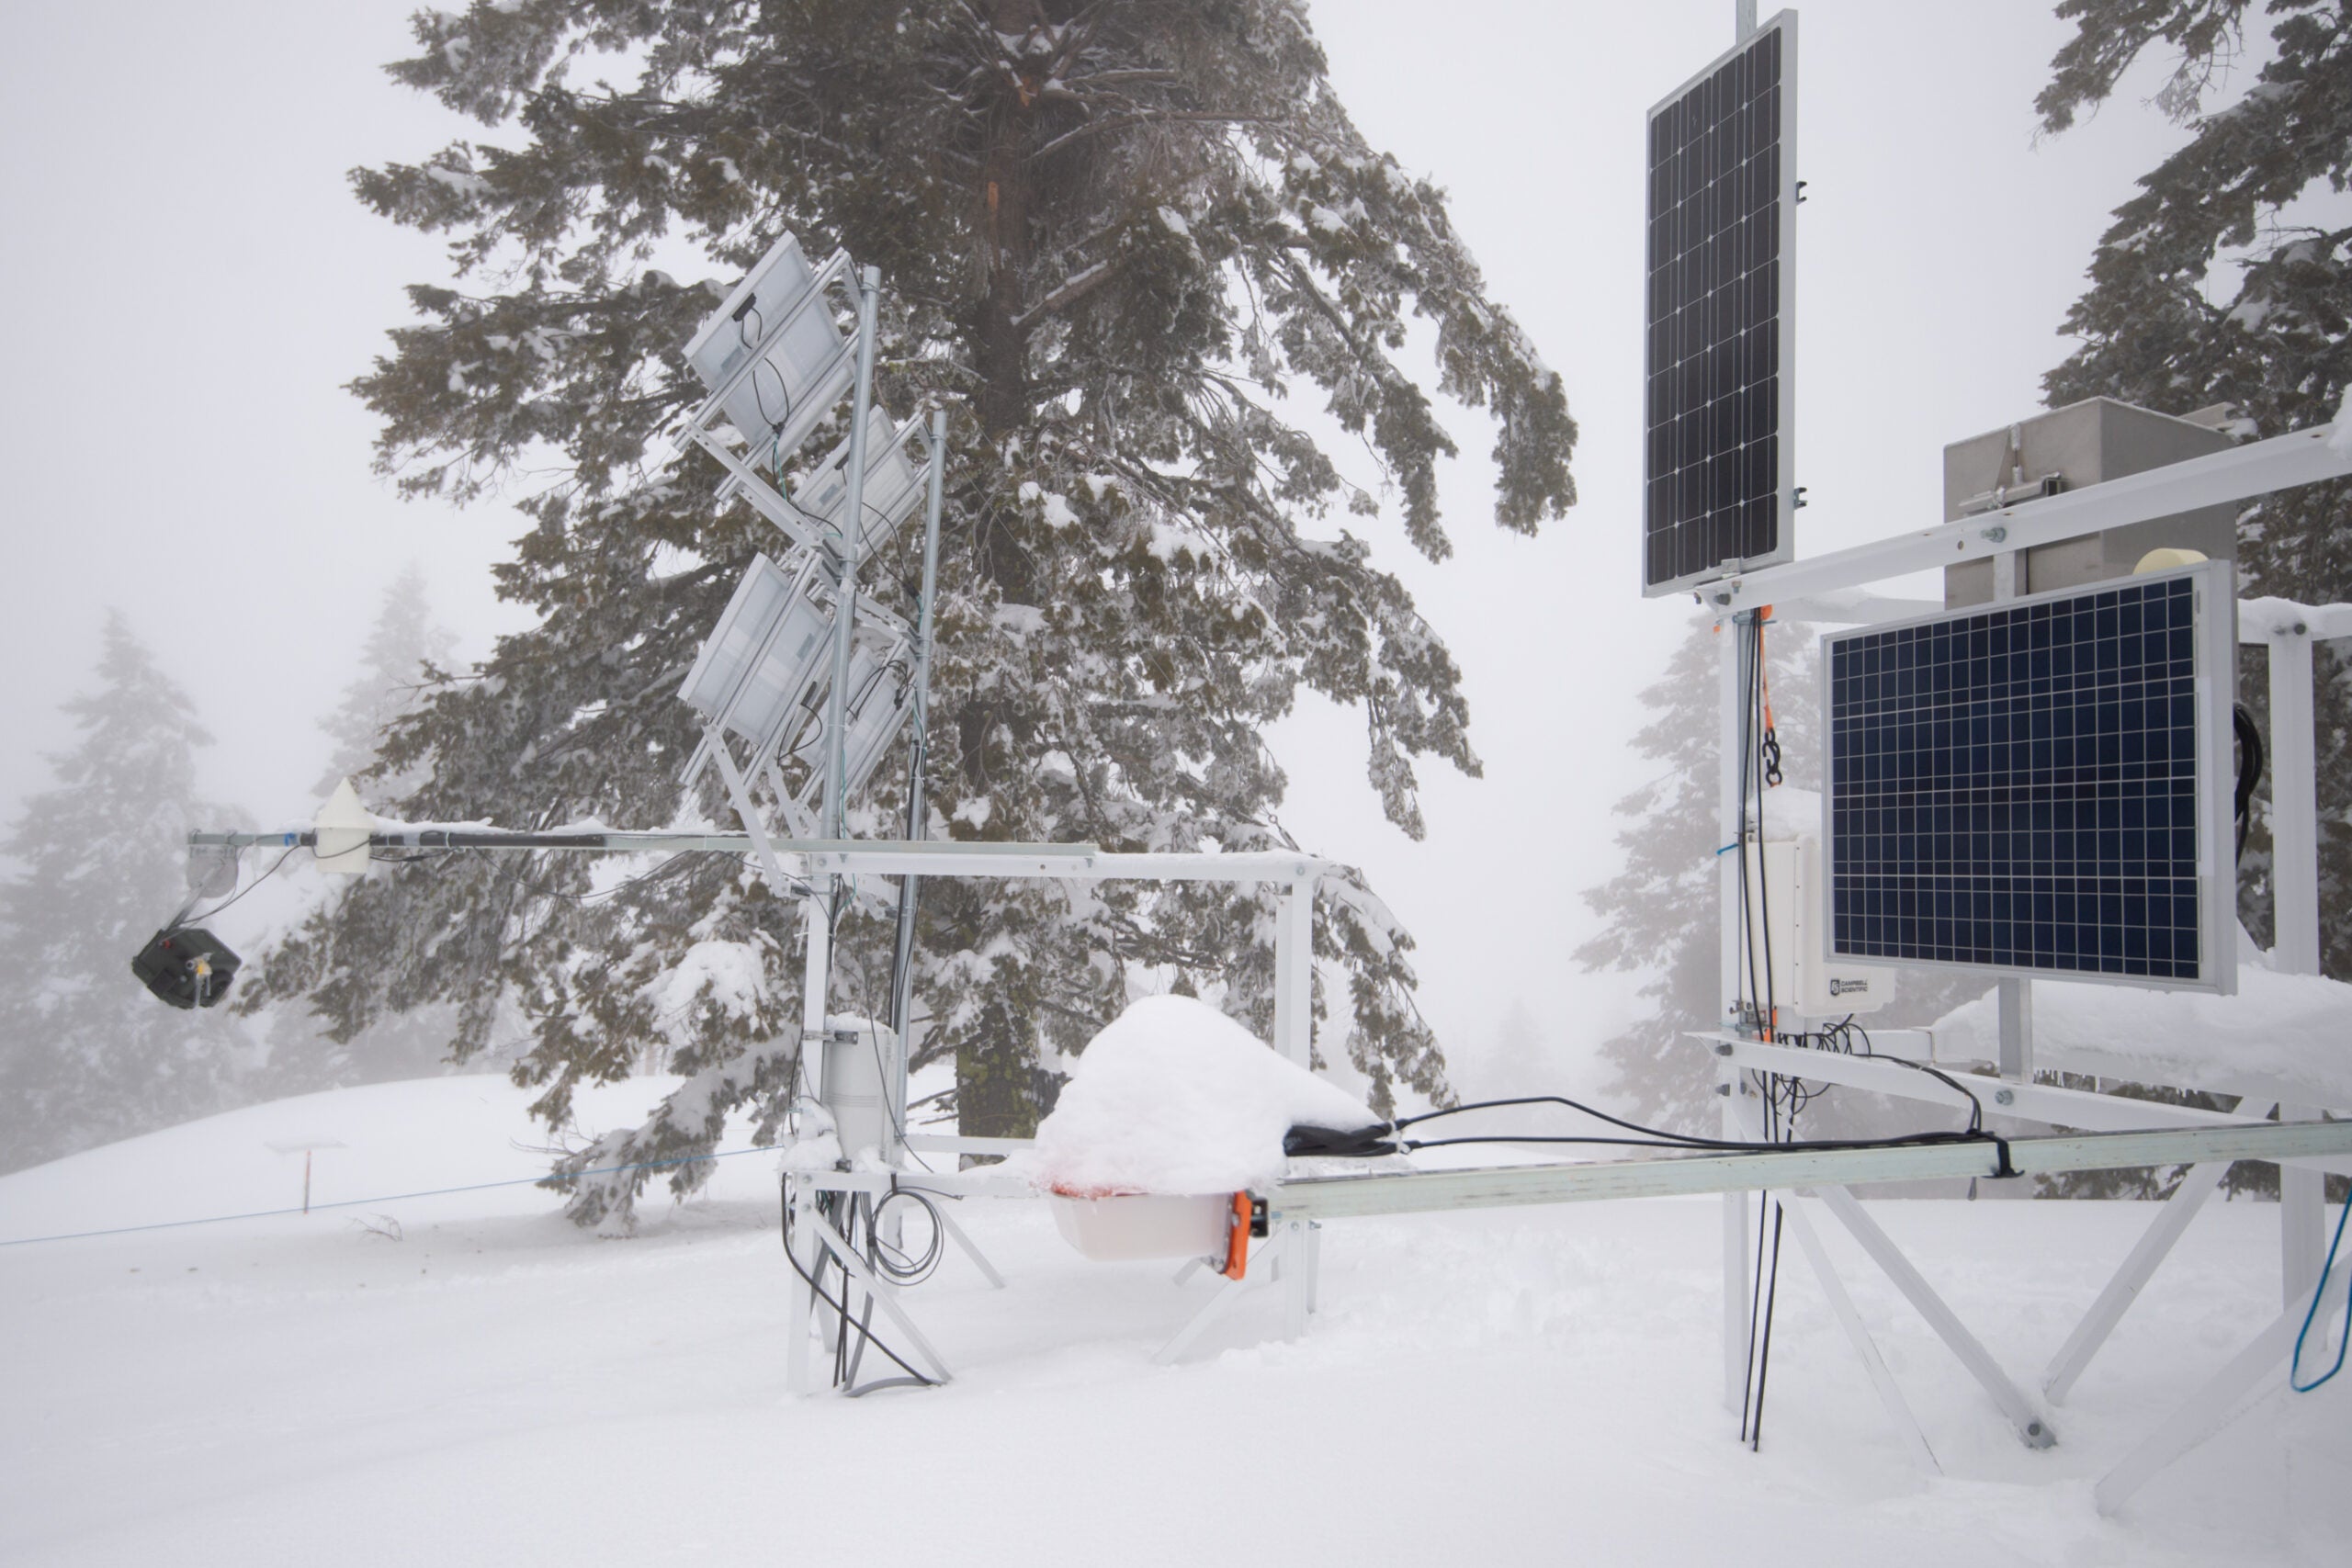 Solar panels and metal structures in snowy conditions